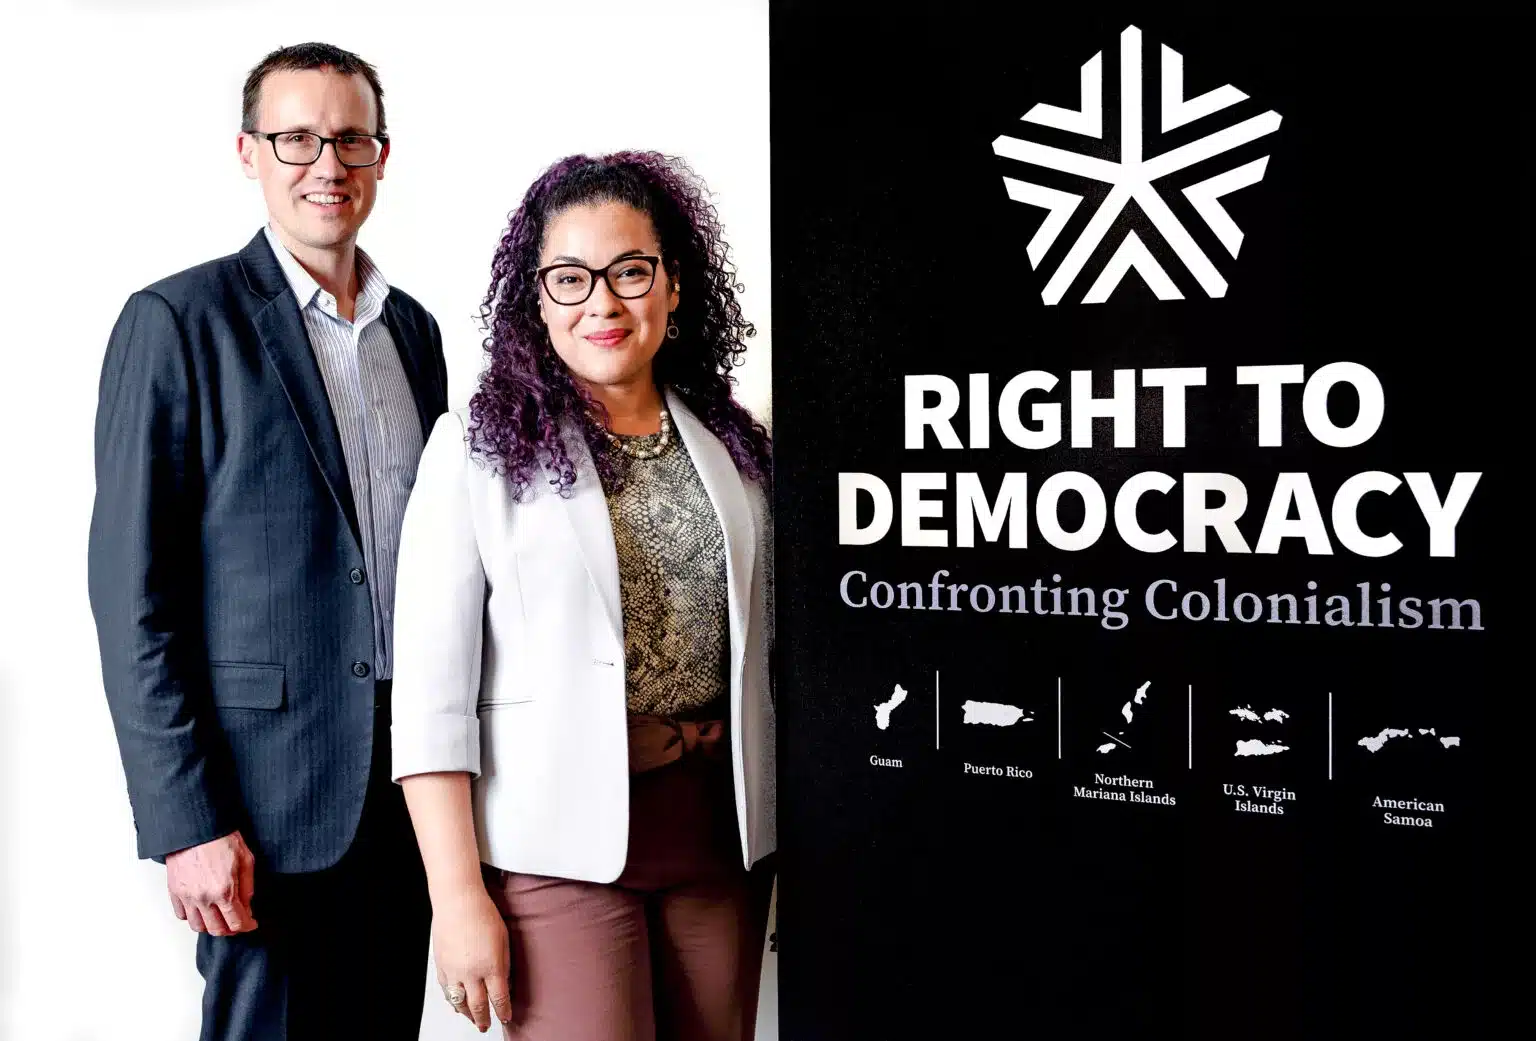 Right to Democracy launches to end colonialism in the United States